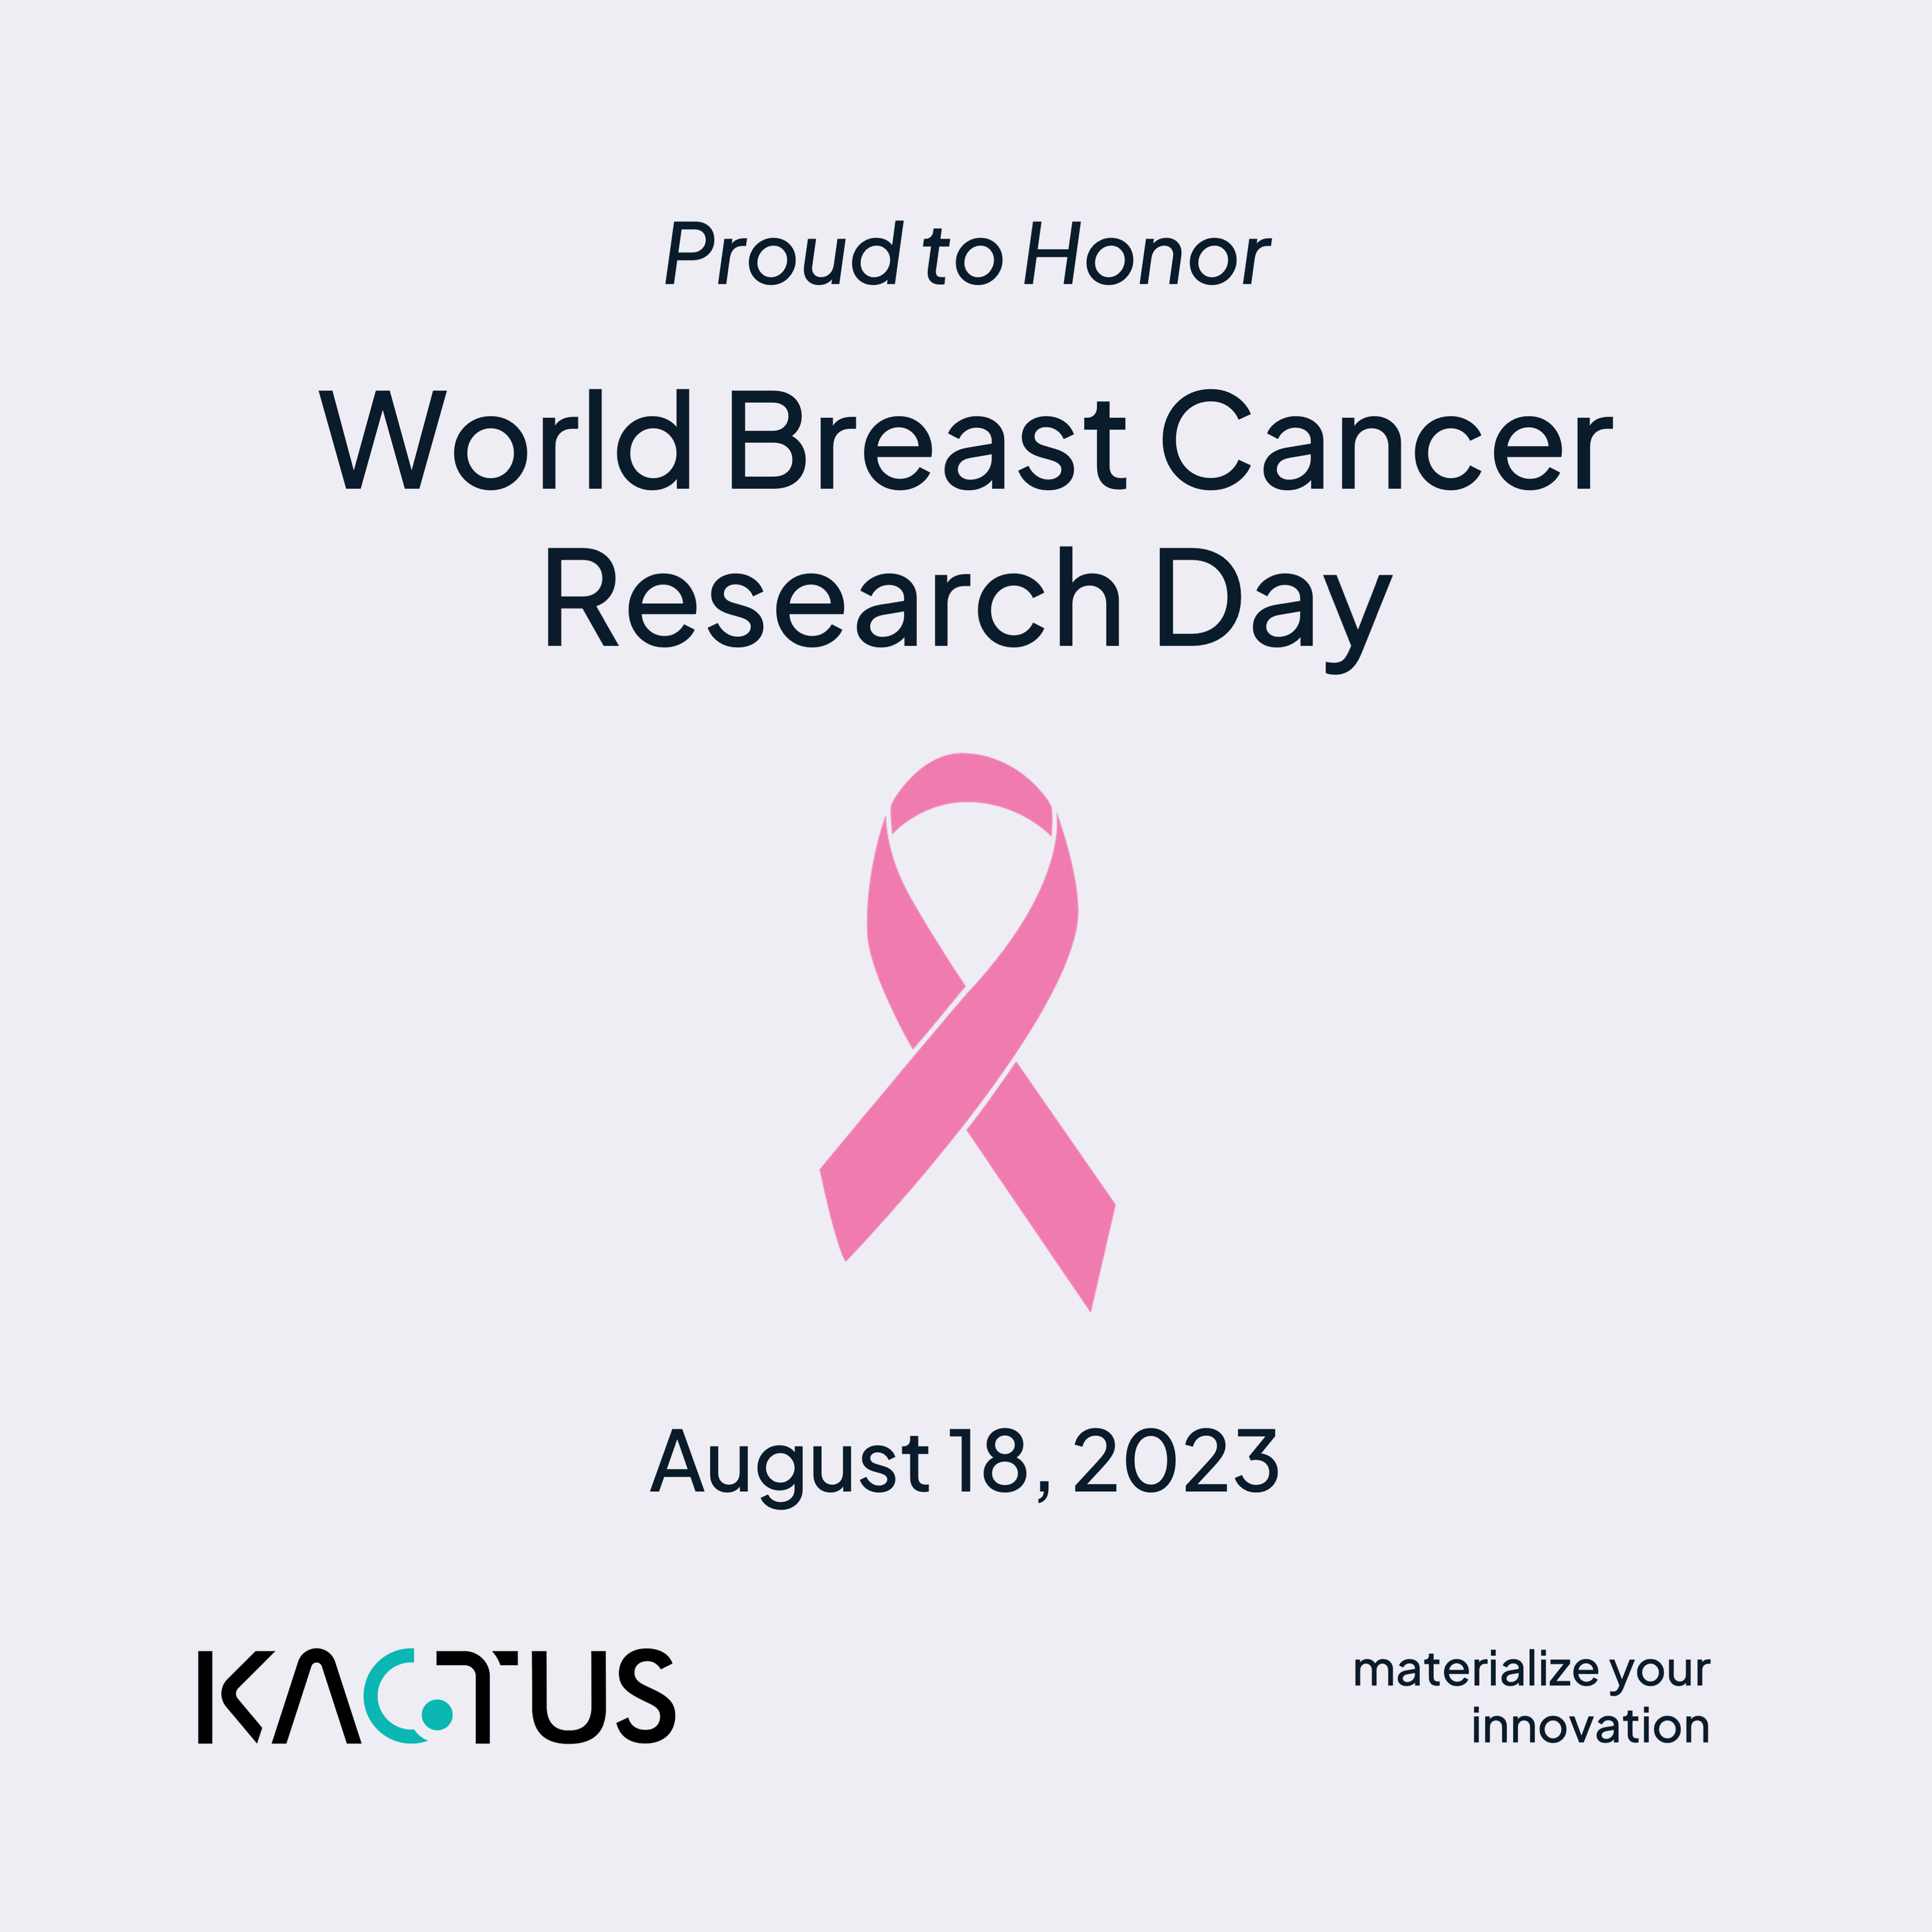 Advancing Breast Cancer Research: Uniting for Progress on World Breast Cancer Research Day 2023